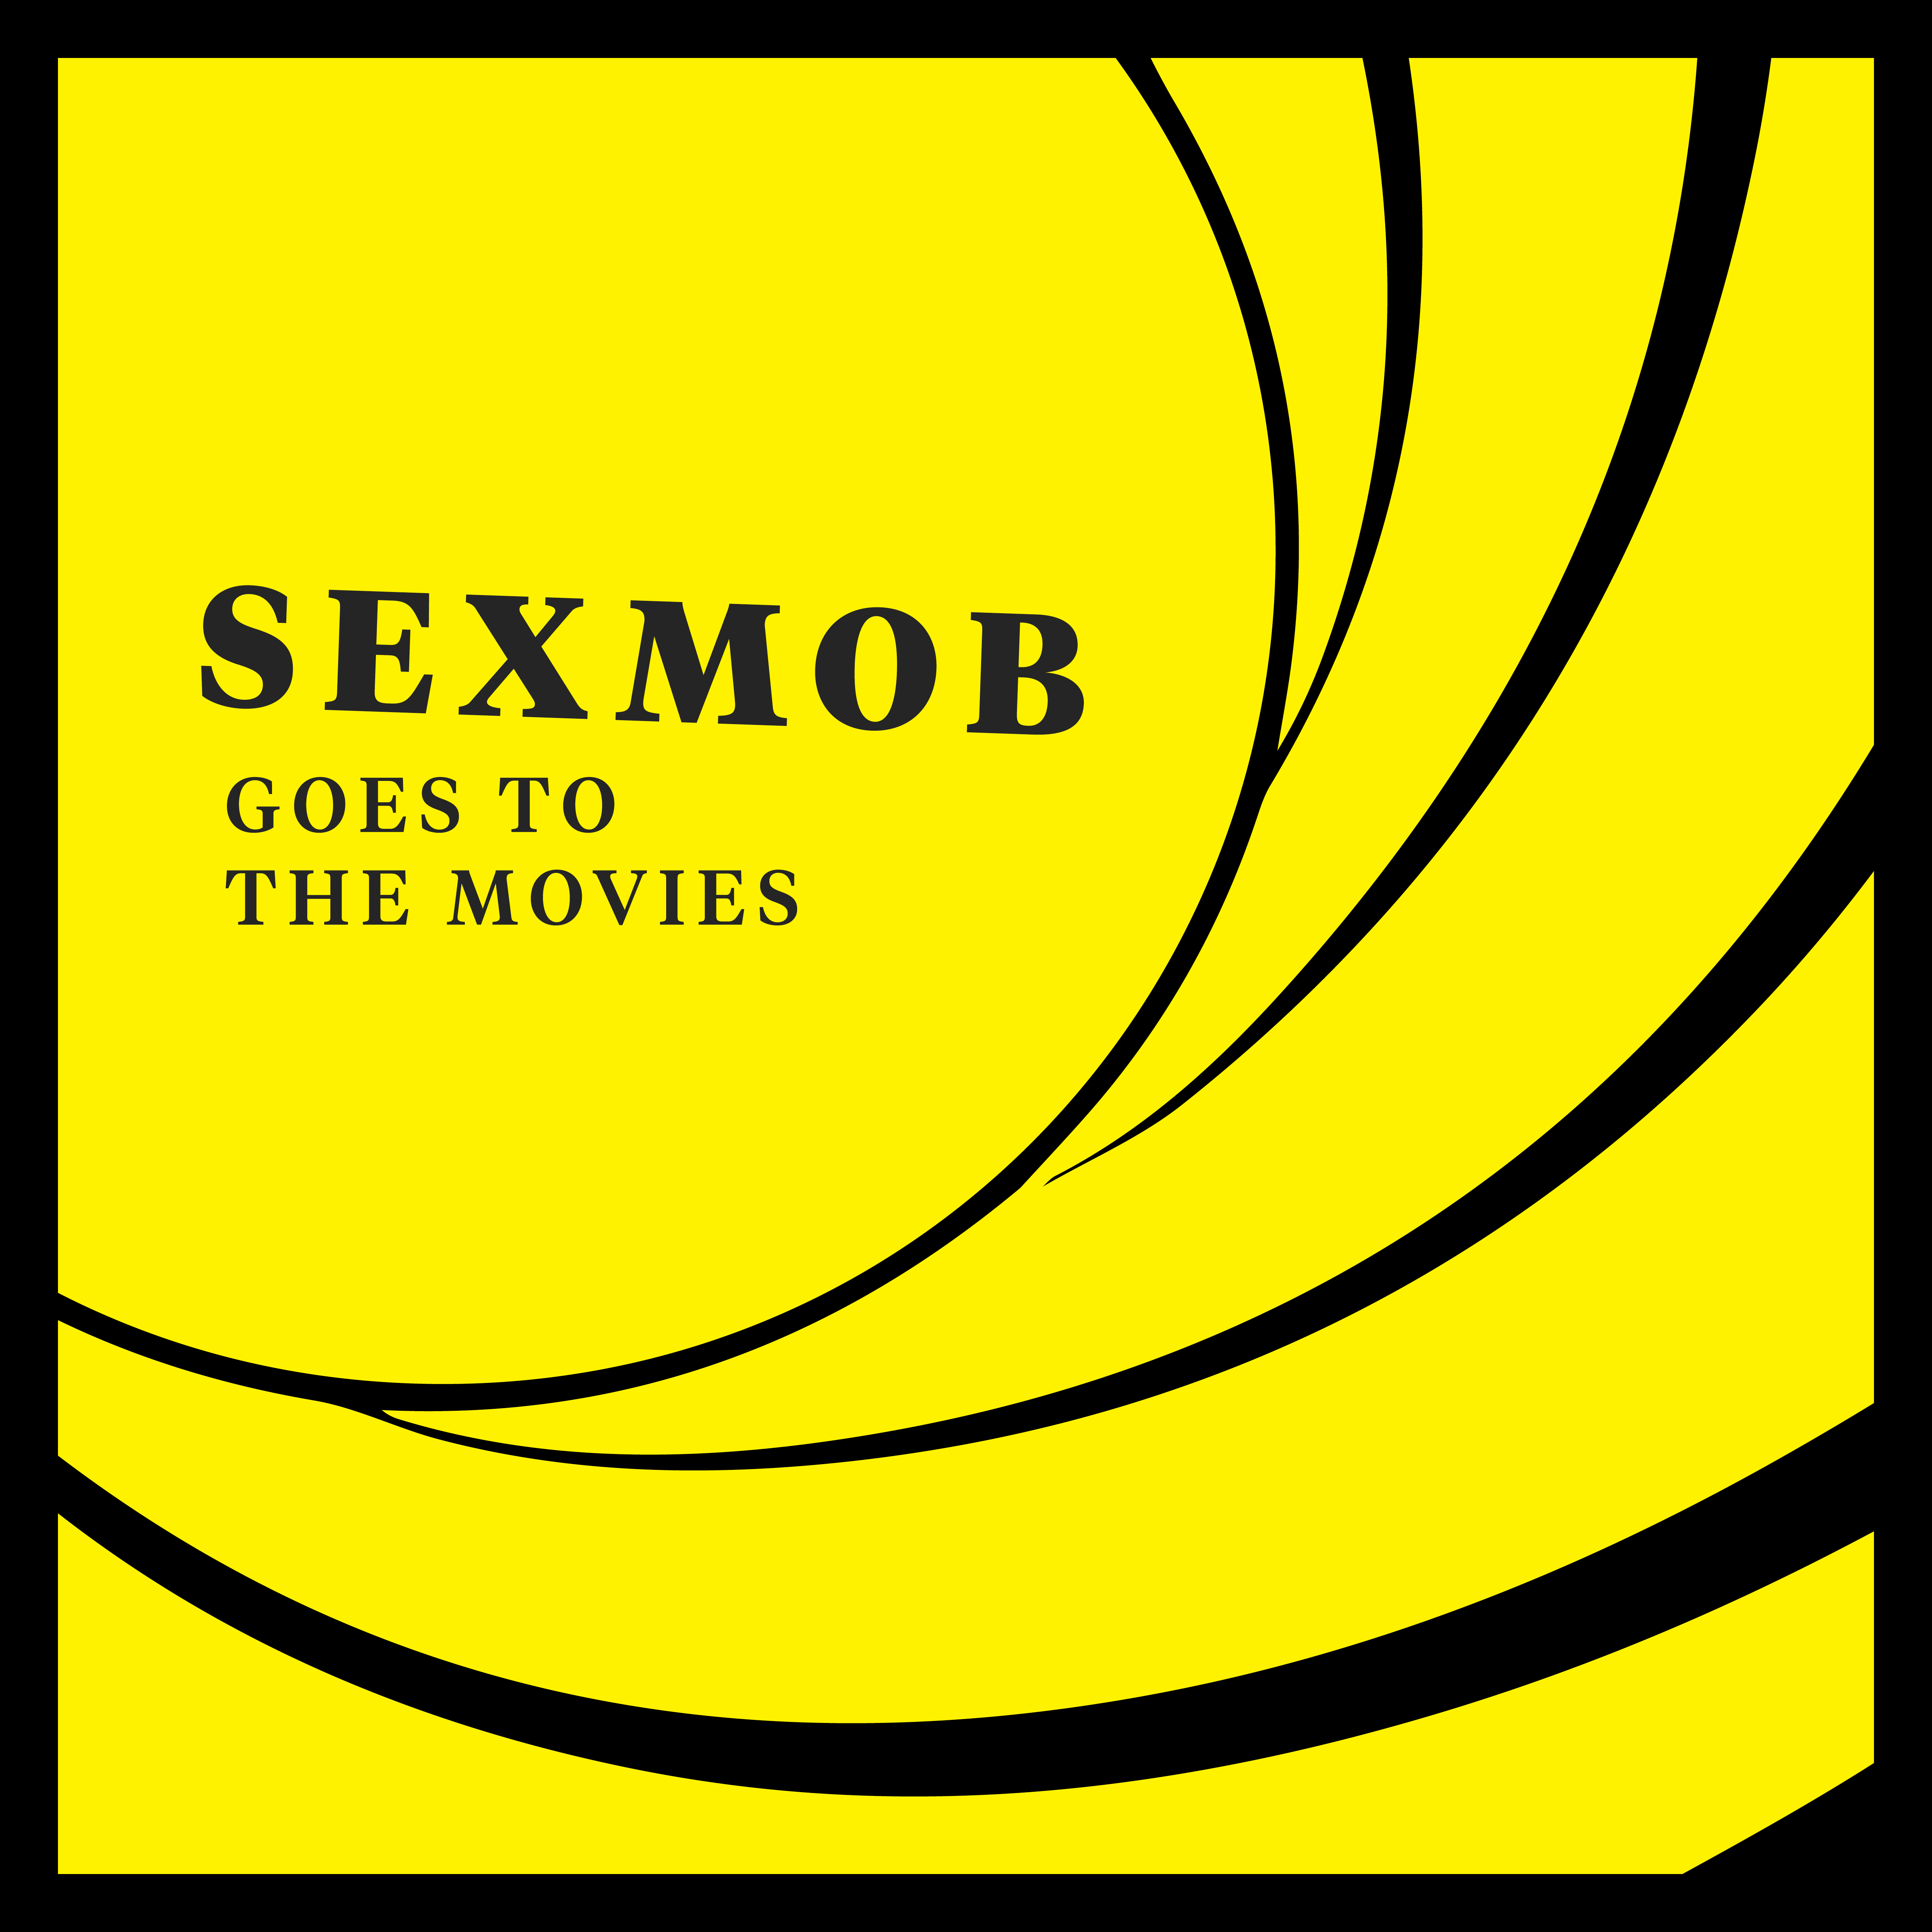 type-based poster with black text on a yellow background for the band Sex Mob